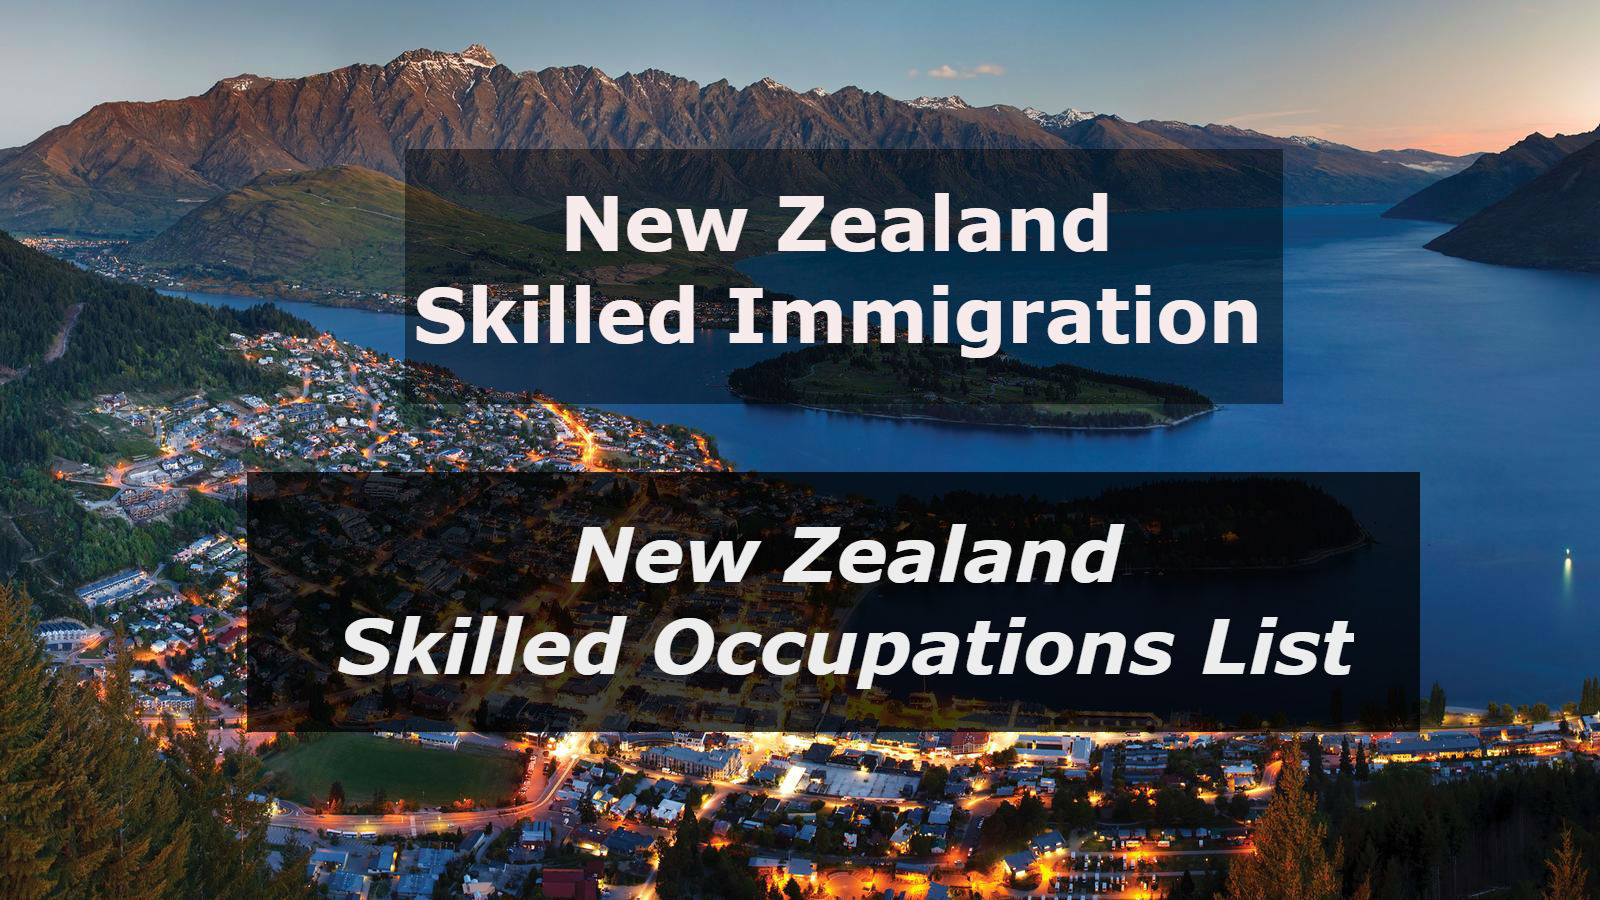 New Zealand Skilled Occupations List | New Zealand Skilled Immigration